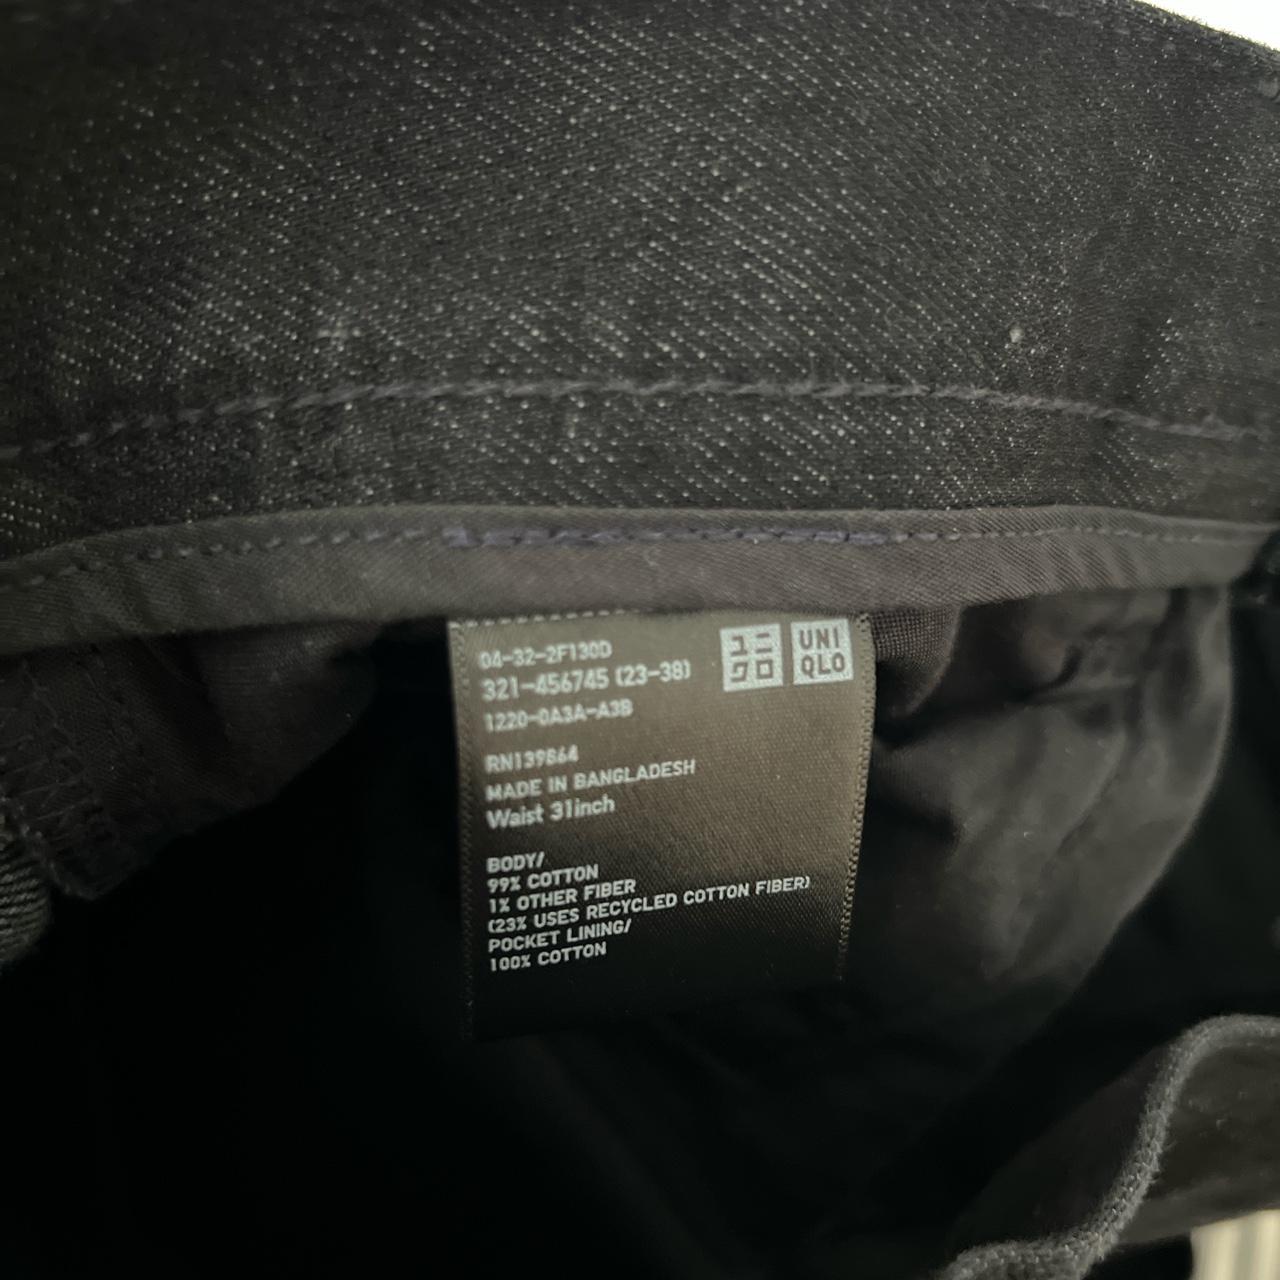 UNIQLO x Helmut Lang sweatshirt and pants, Comme Ca Store slip on